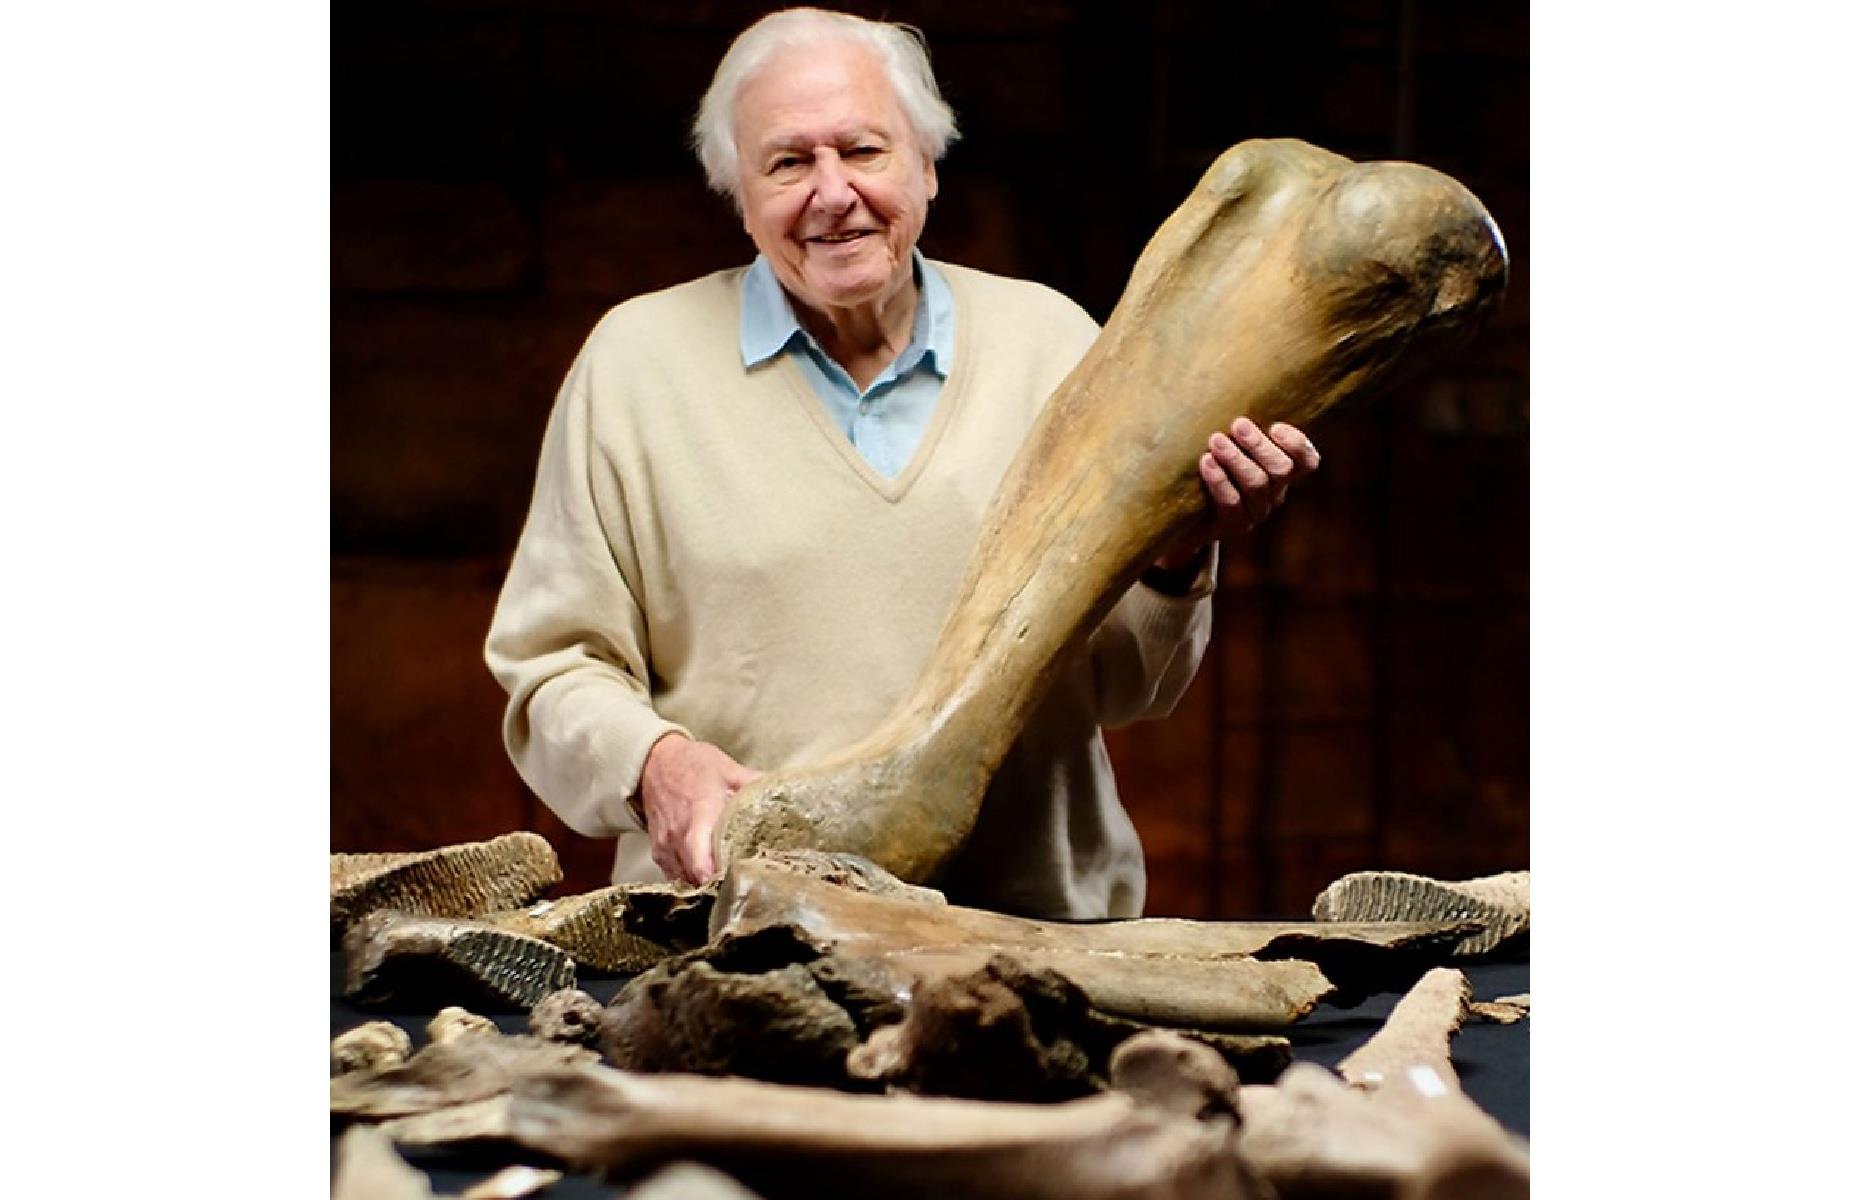 <p>At a gravel quarry near Swindon in the Cotswolds, the remains of <a href="https://www.theguardian.com/science/2021/dec/19/five-ice-age-mammoths-unearthed-in-cotswolds-after-220000-years">five woolly mammoths</a>, dating back to the last Ice Age, were unearthed in December 2021. While single examples of such creatures have been found before, to find five of the 200,000-year old skeletons in such pristine condition was “incredibly rare” according to evolutionary biologist Professor Ben Garrod. They were the subject of a documentary presented by David Attenborough (pictured).</p>